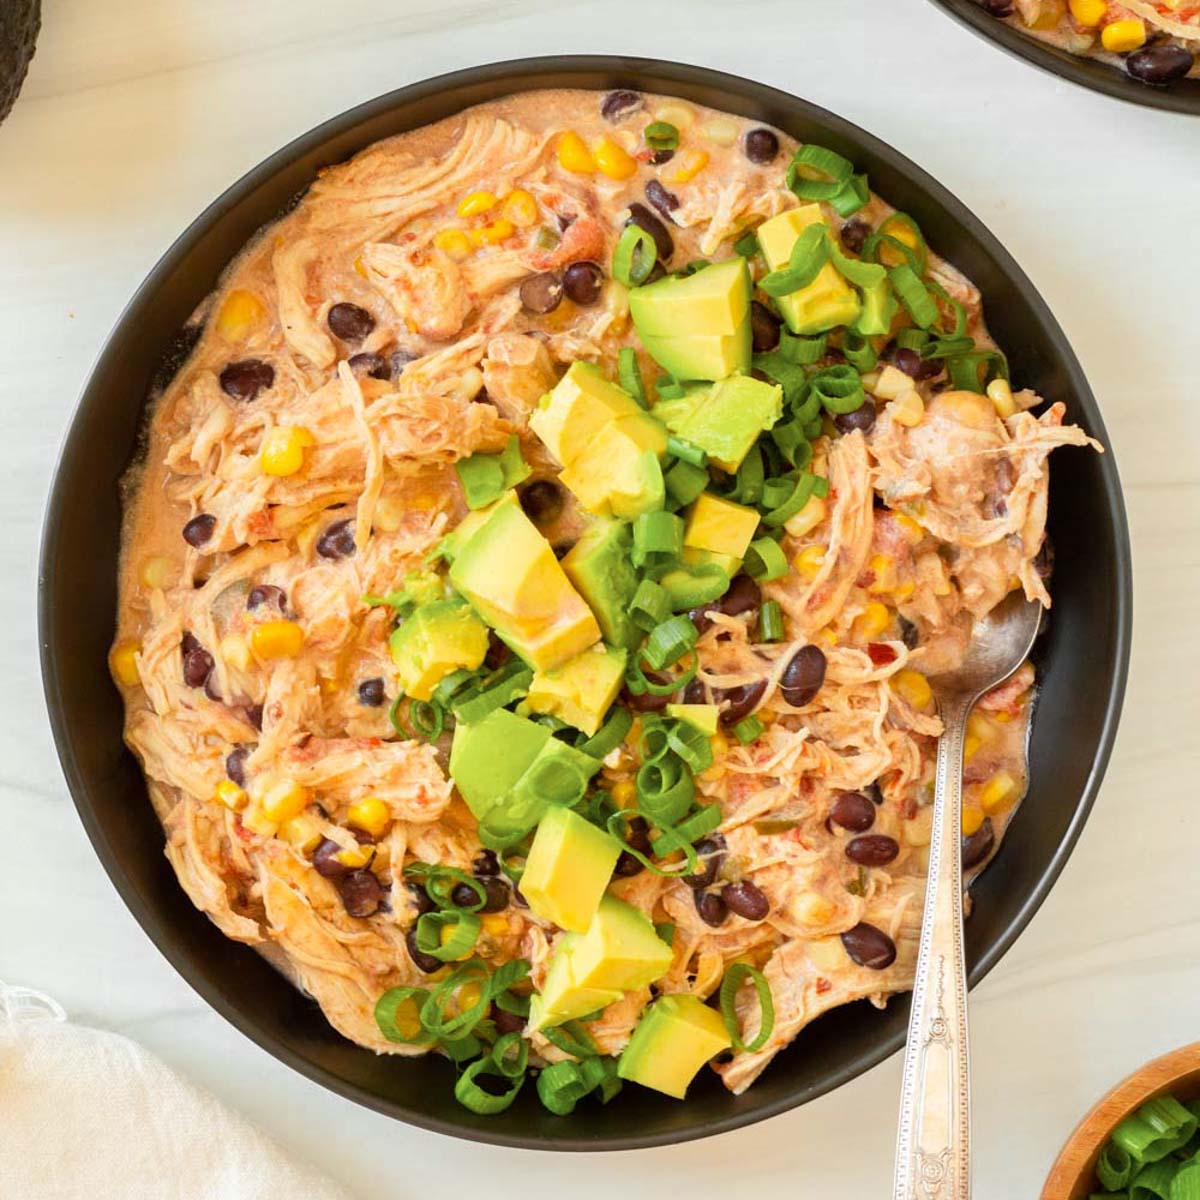 This crockpot cream cheese chicken chili is an easy dump and go crockpot recipe made with simple ingredients for a flavorful and filling comfort food meal.